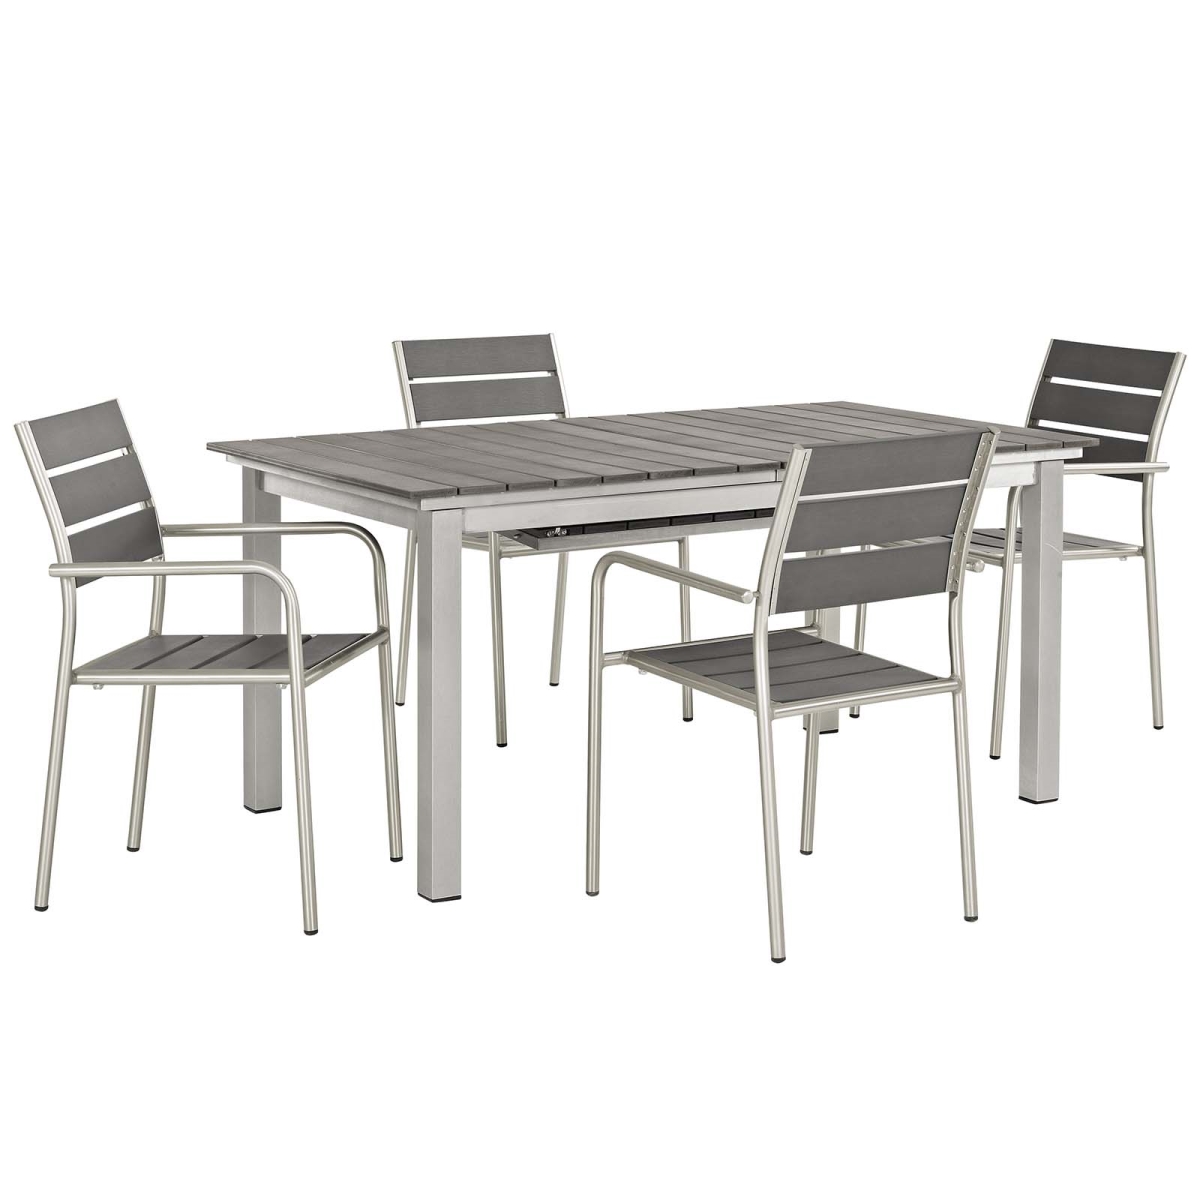 Modway Furniture EEI-3197-SLV-GRY-SET Shore Outdoor Patio Aluminum Outdoor Dining Set - Silver Gray, 5 Piece - 35 x 108 x 80.5 in.